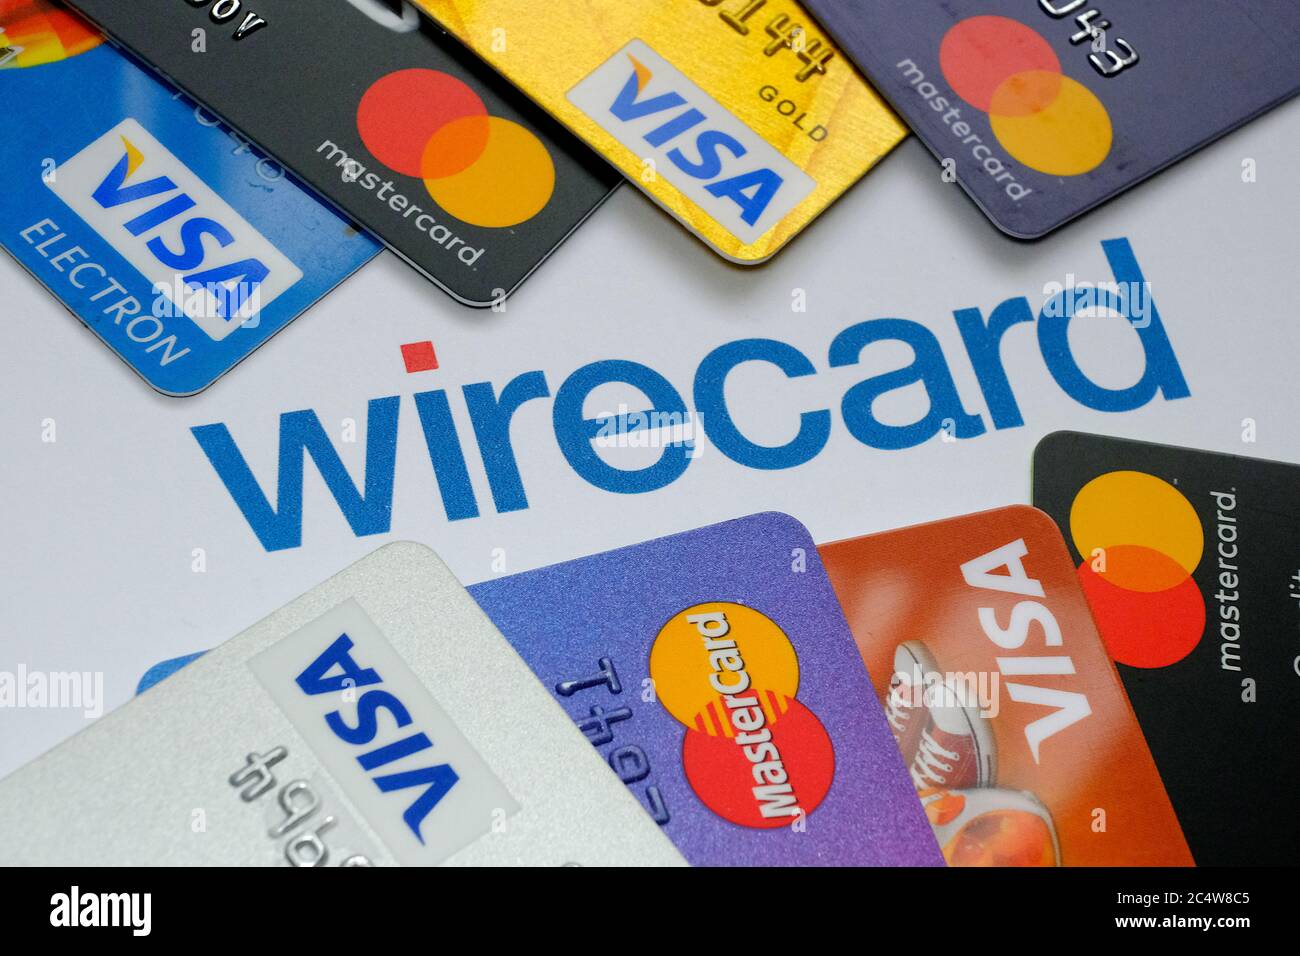 Wirecard logo on paper and VISA and MASTERCARD credit cards around it. Concept. Stock Photo